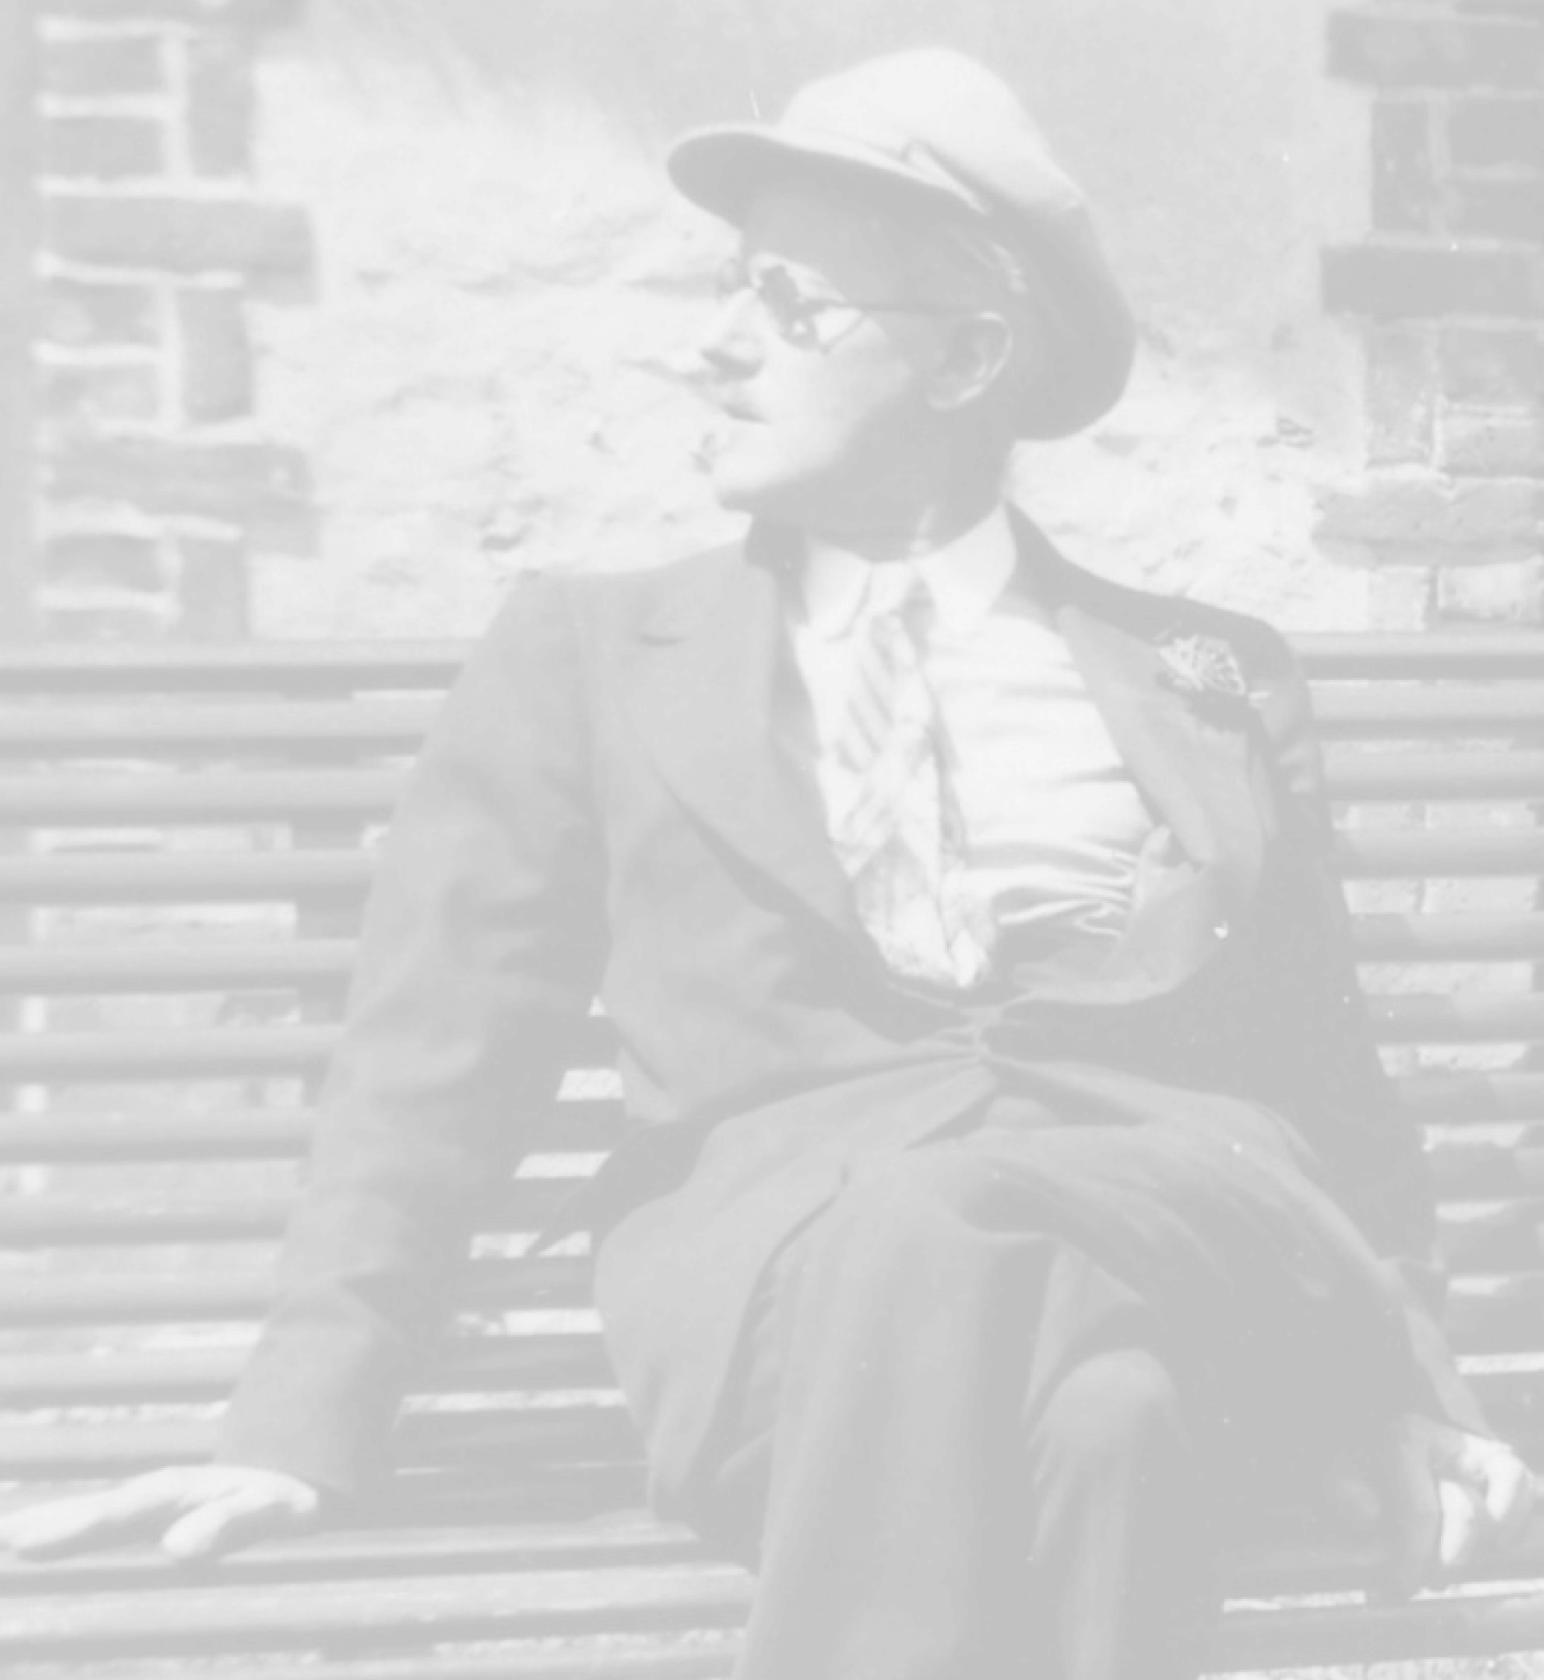 james-joyce-bench-national-library-of-ireland.png